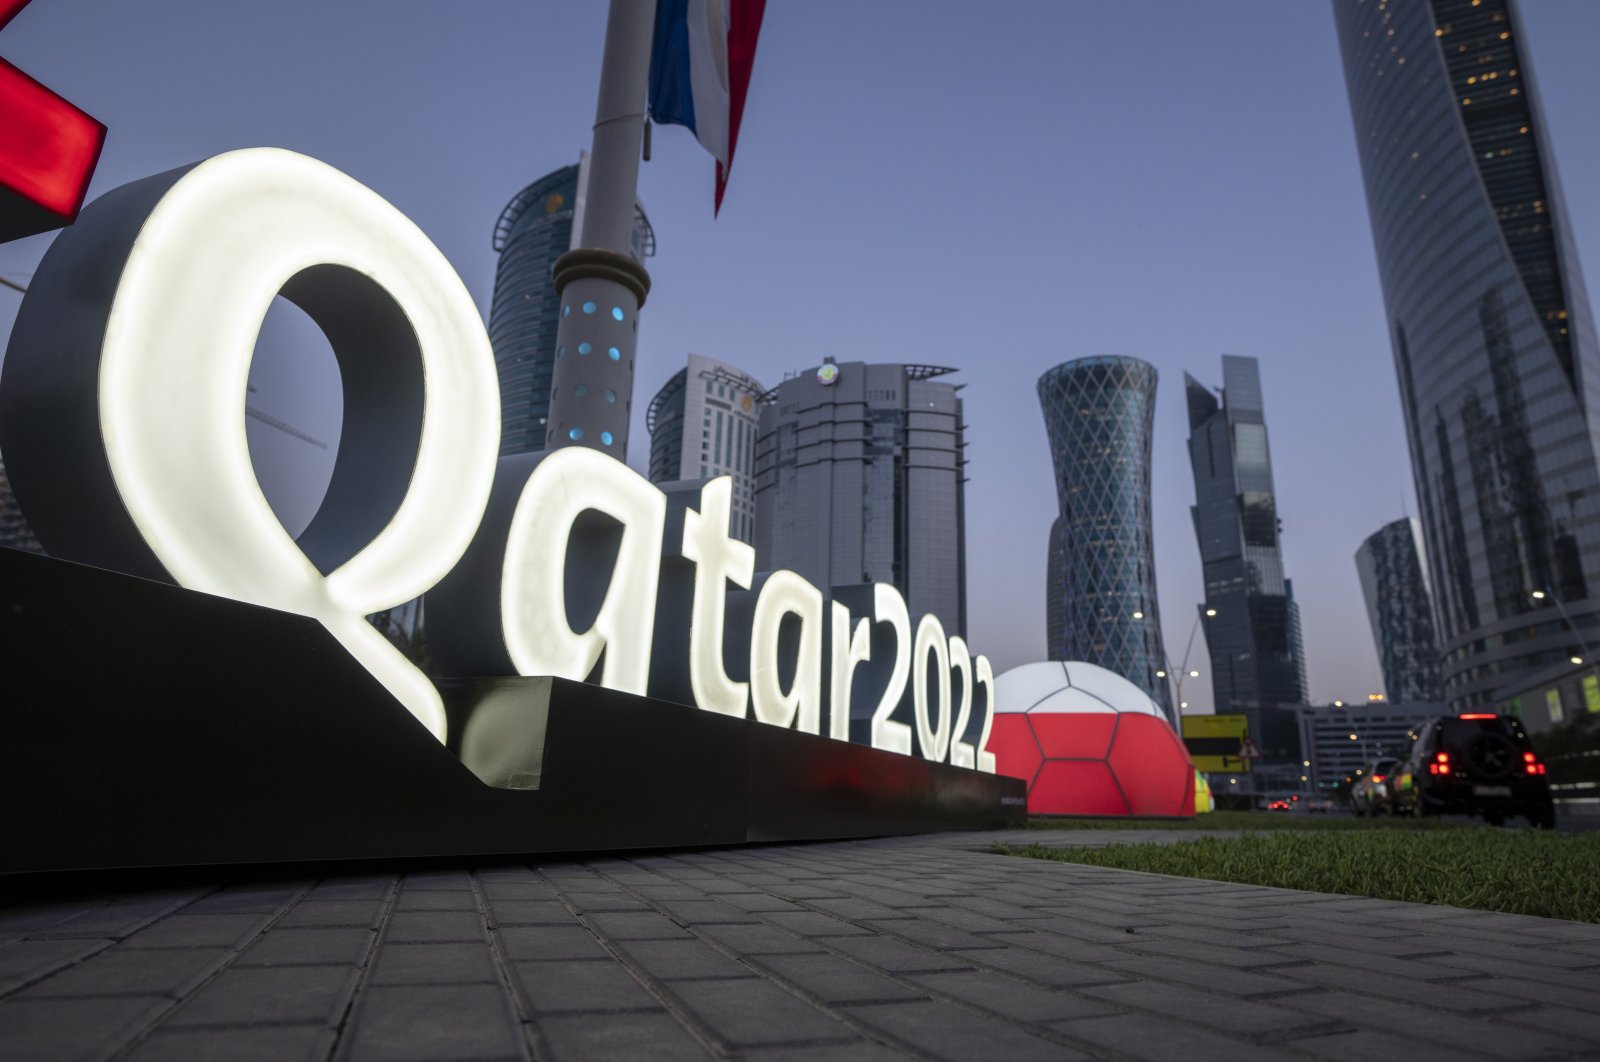 World Cup Branding is displayed near the Doha Exhibition and Convention Center, in Doha, Qatar, March 31, 2022. (AP PHOTO)